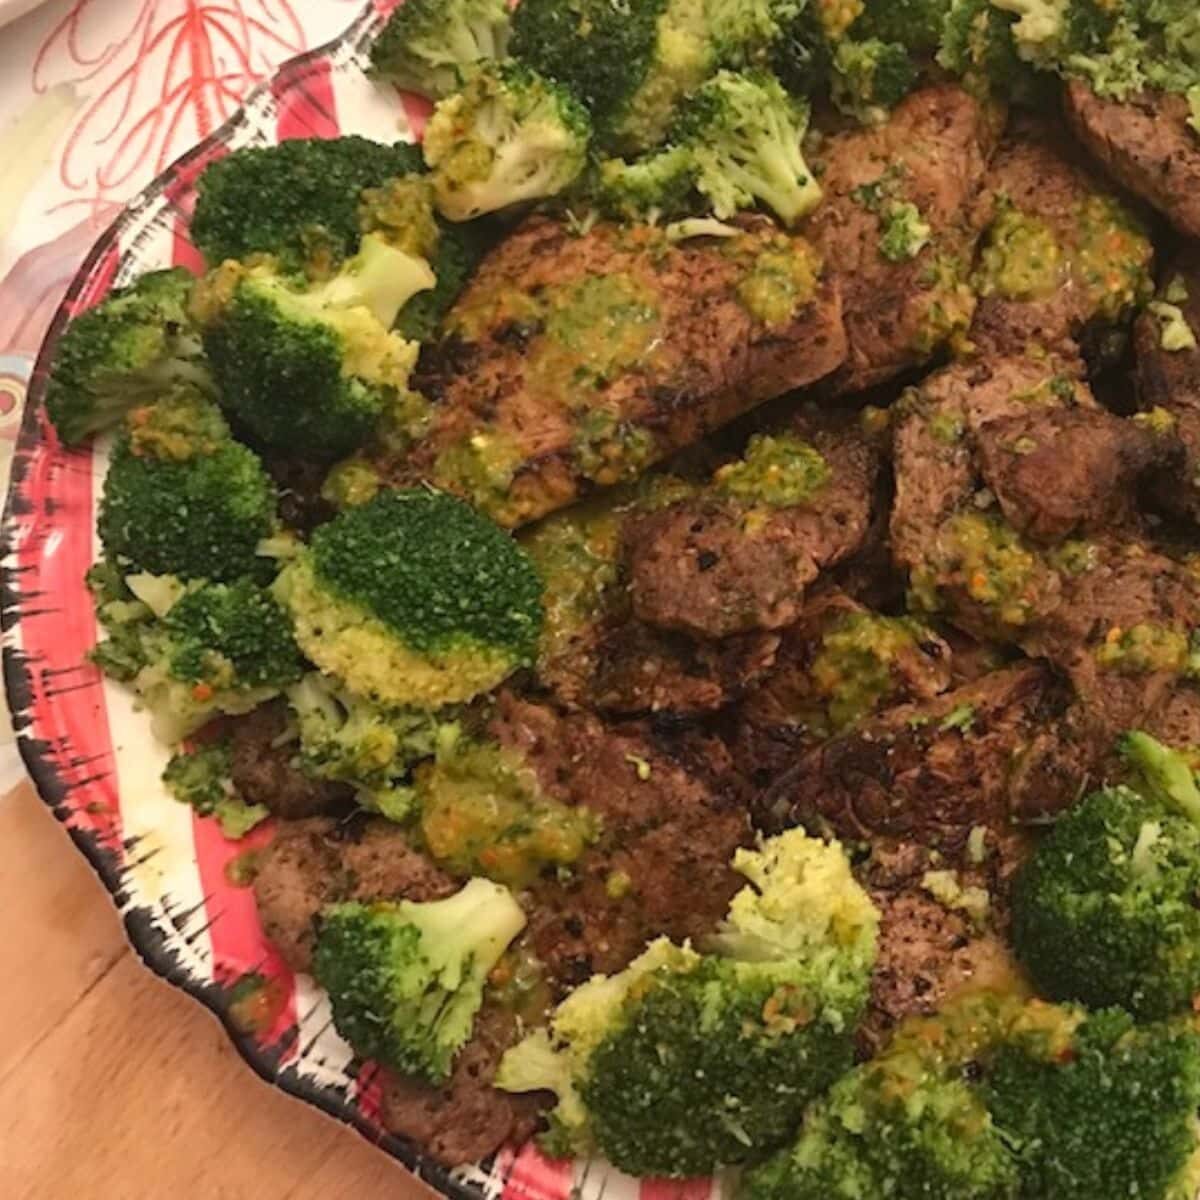 platter of steak and broccoli with chimichurri